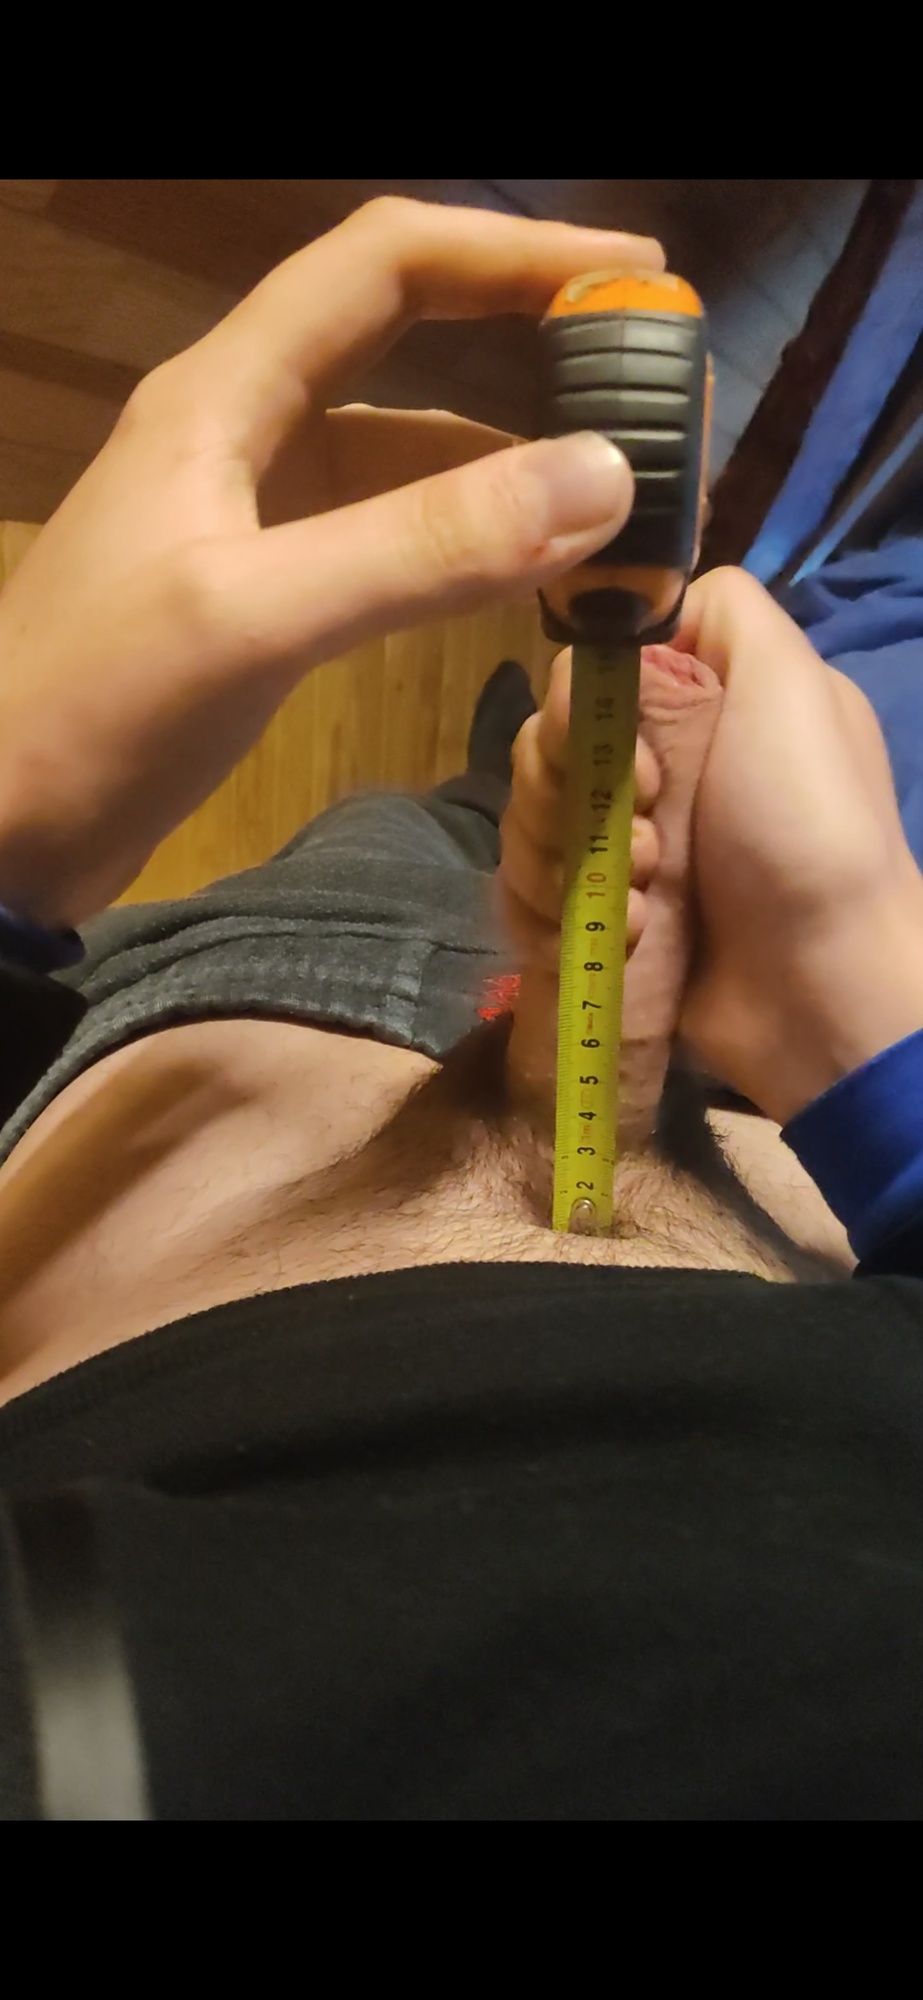 Tried to measure my cock (a little over 15cm max) #9